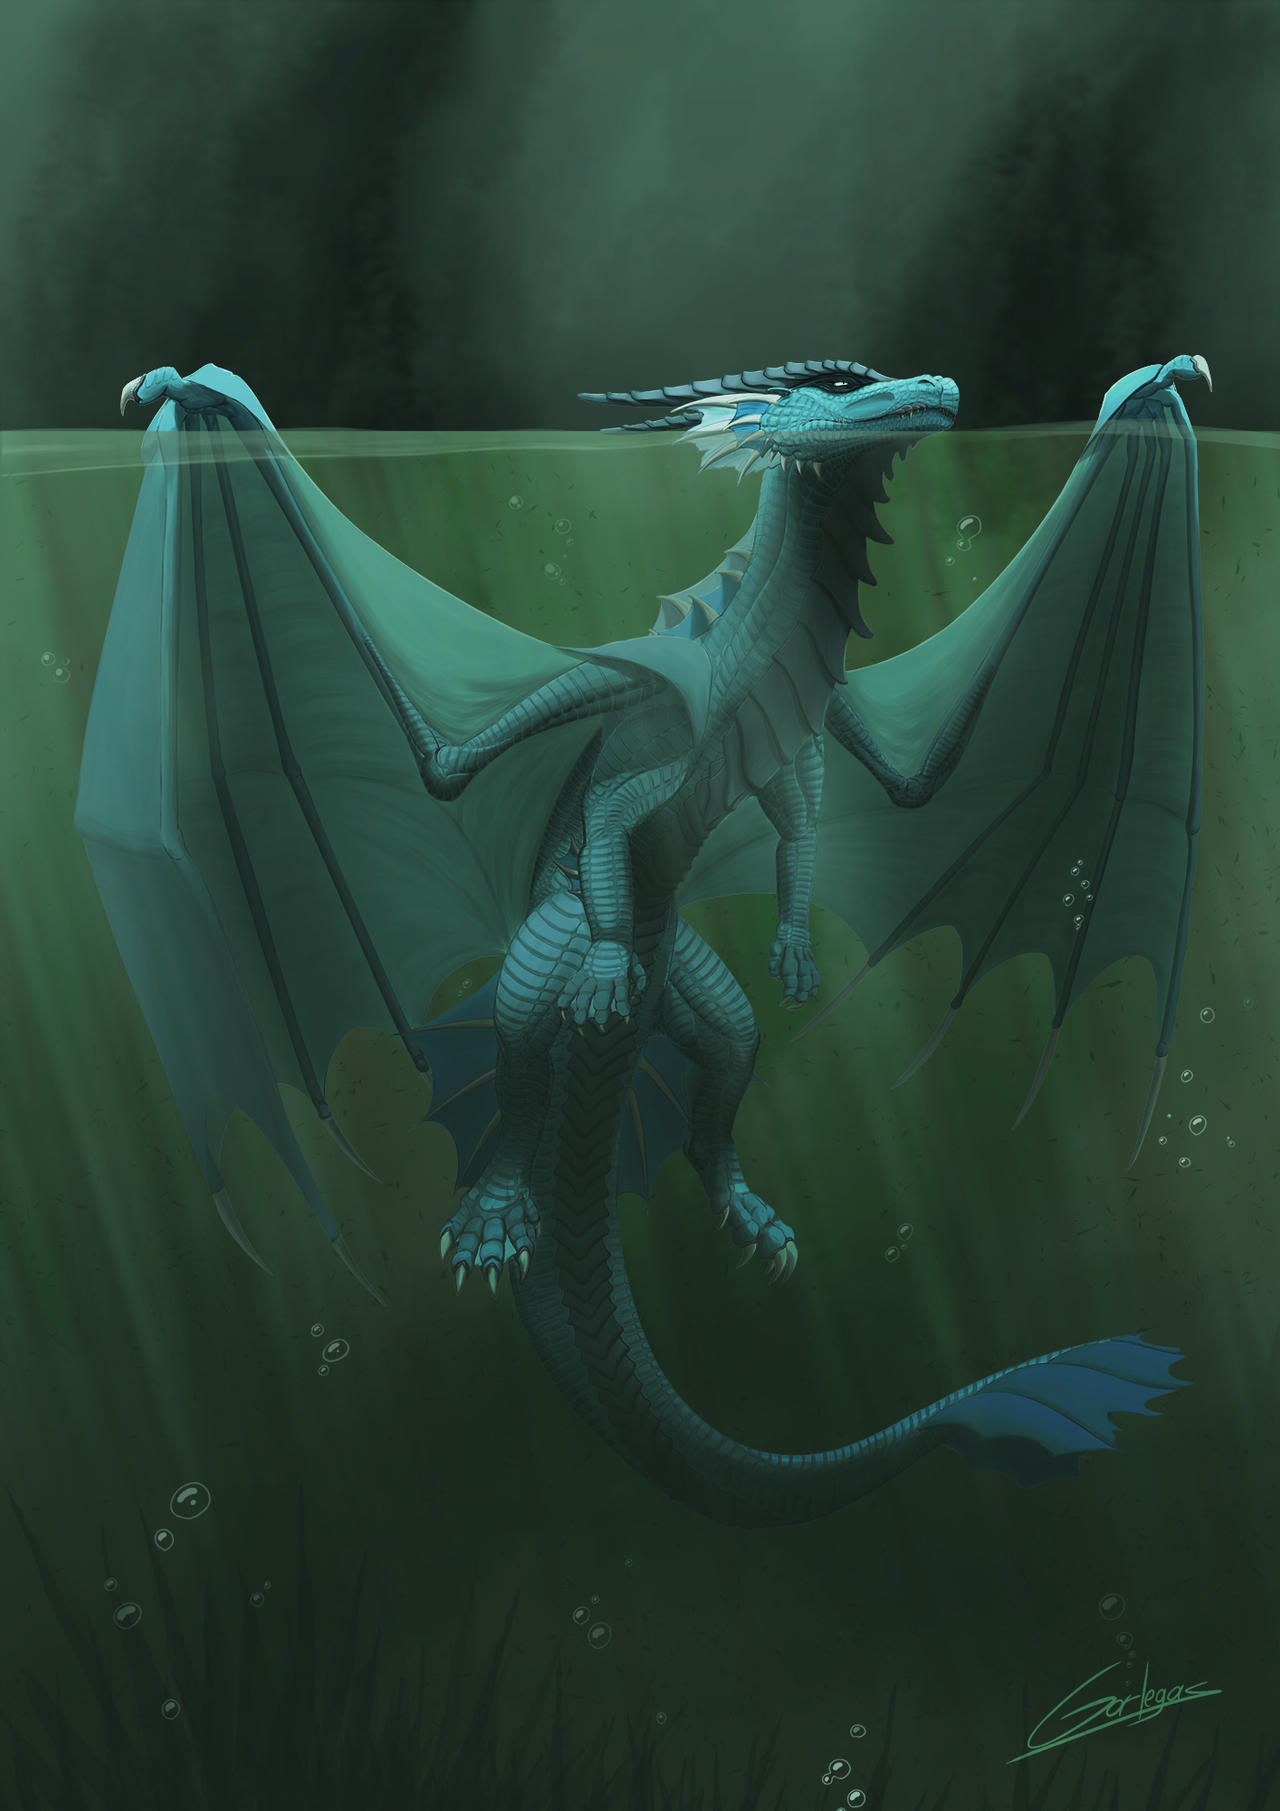 waiting_for_a_good_catch_by_garlegas_def1l3f-fullview.png